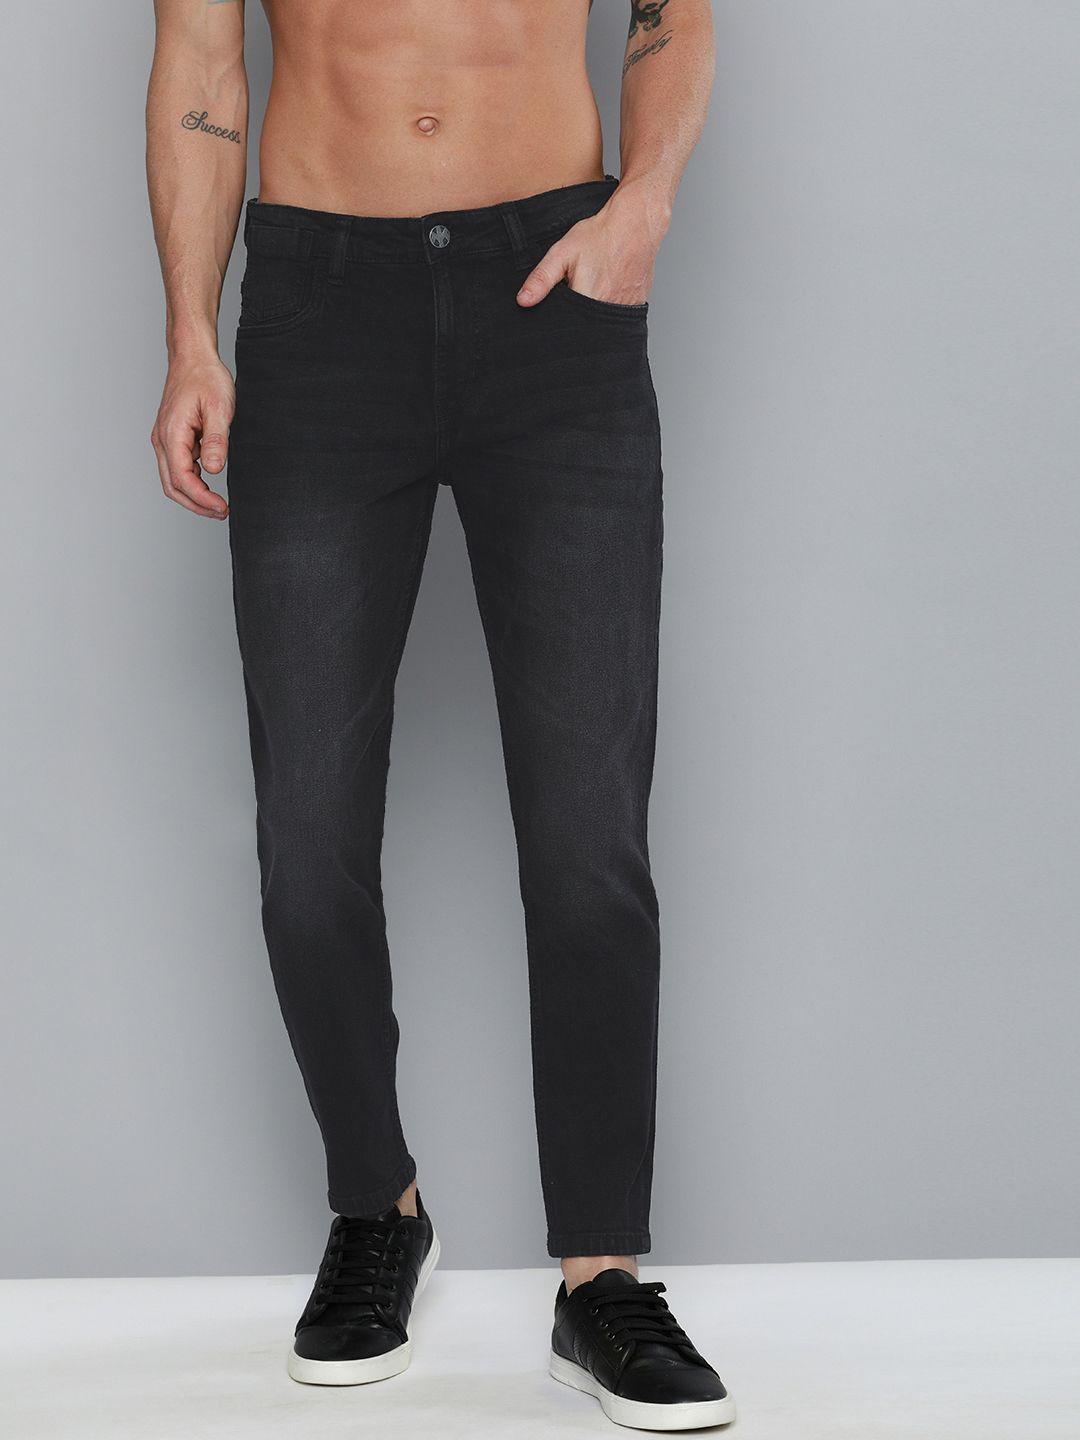 kook n keech men black tapered fit mid-rise clean look stretchable jeans